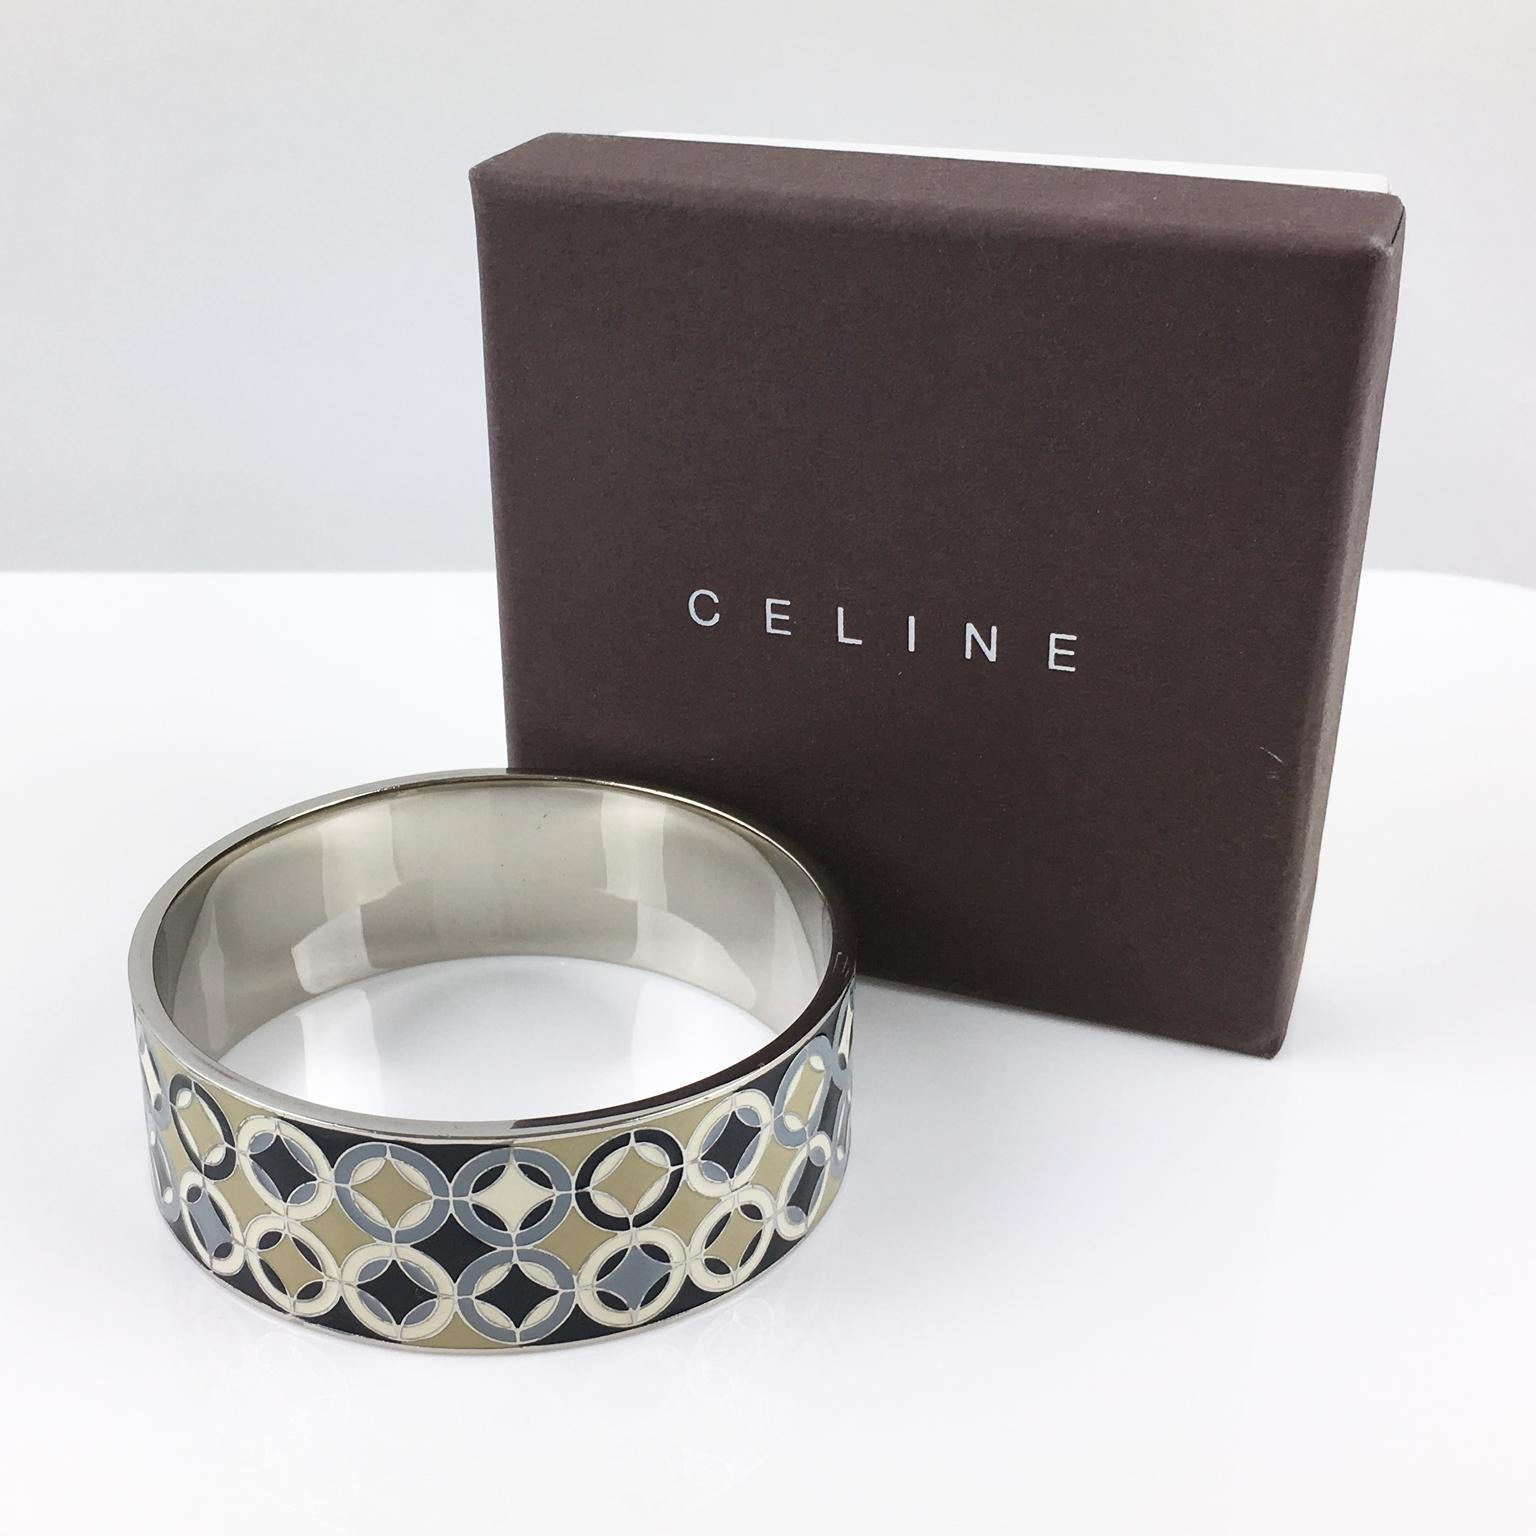 This lovely Celine Paris silver plate bangle bracelet boasts a chunky sliced band shape with a geometric modernist enameled design in assorted black, gray, beige, and ivory colors. The piece is marked 